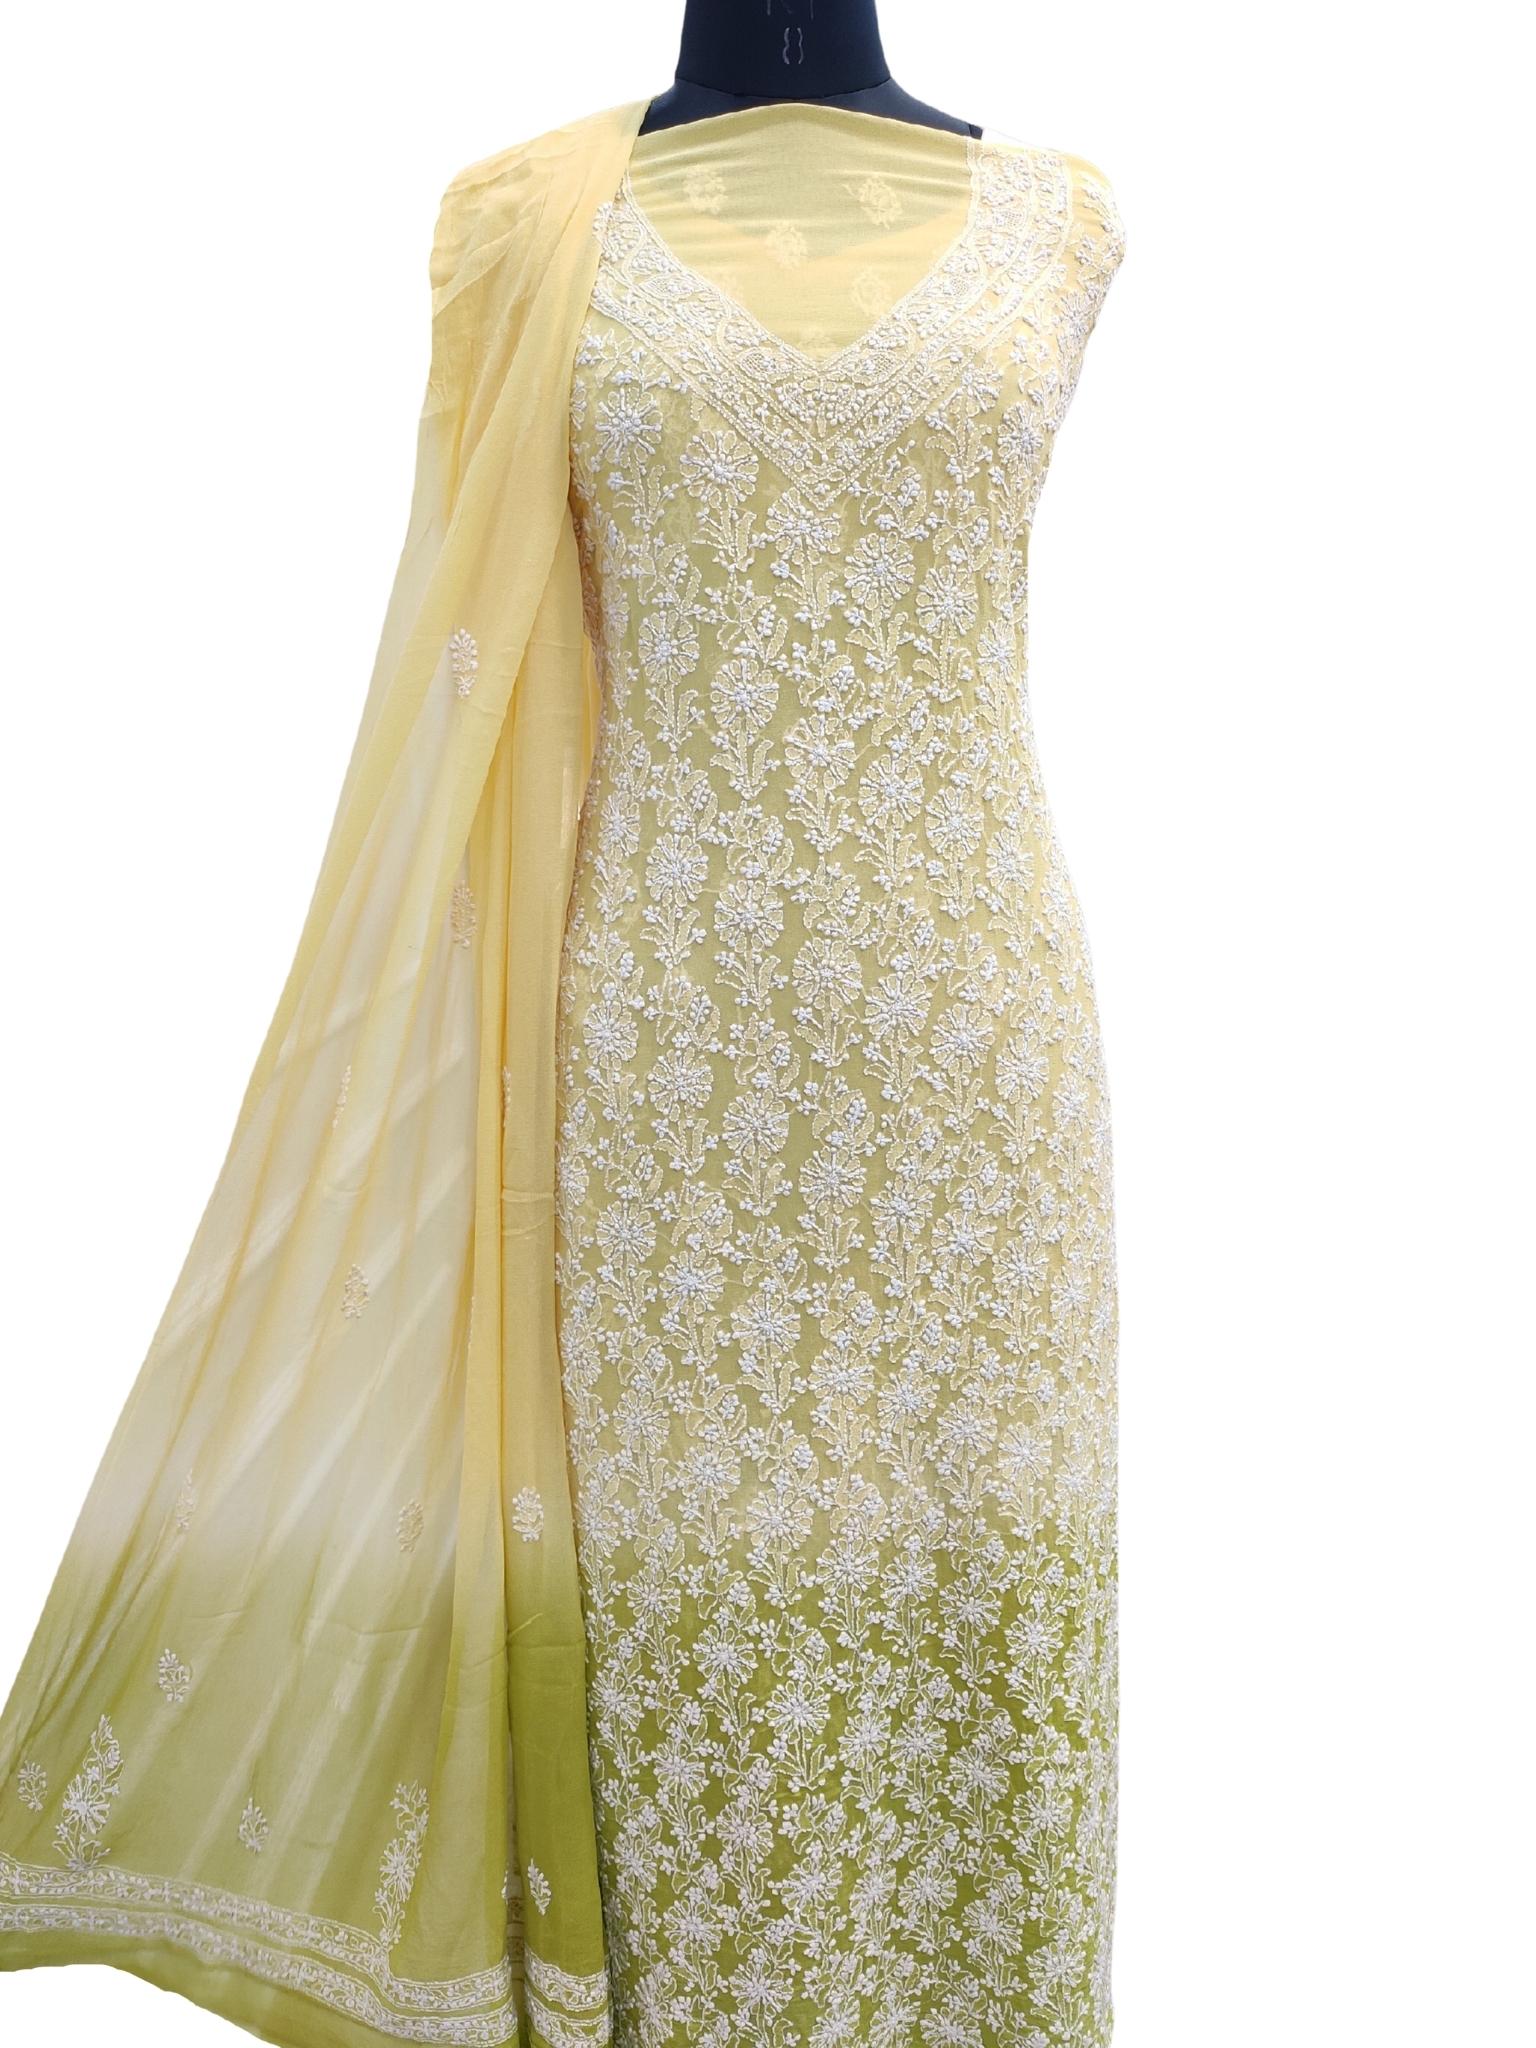 Shyamal Chikan Hand Embroidered Yellow Pure Georgette Lucknowi Chikankari Unstitched Suit Piece  - S1445